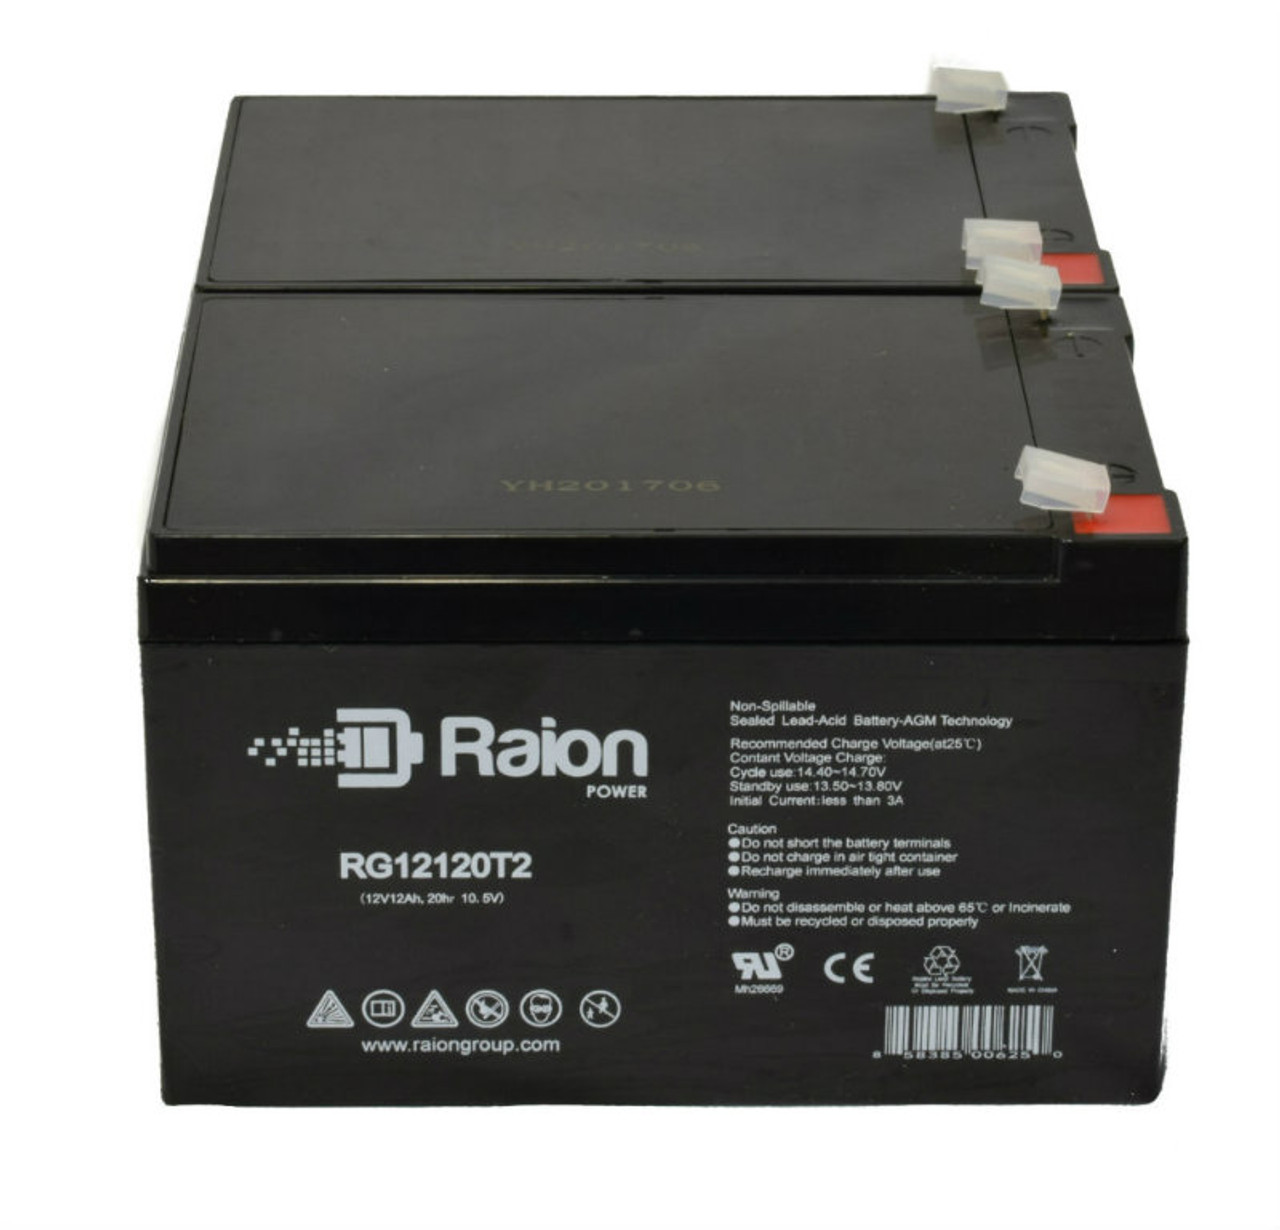 Raion Power 12V 12Ah Non-Spillable Compatible Replacement Battery for Black Box BAT/BBB12 - (2 Pack)